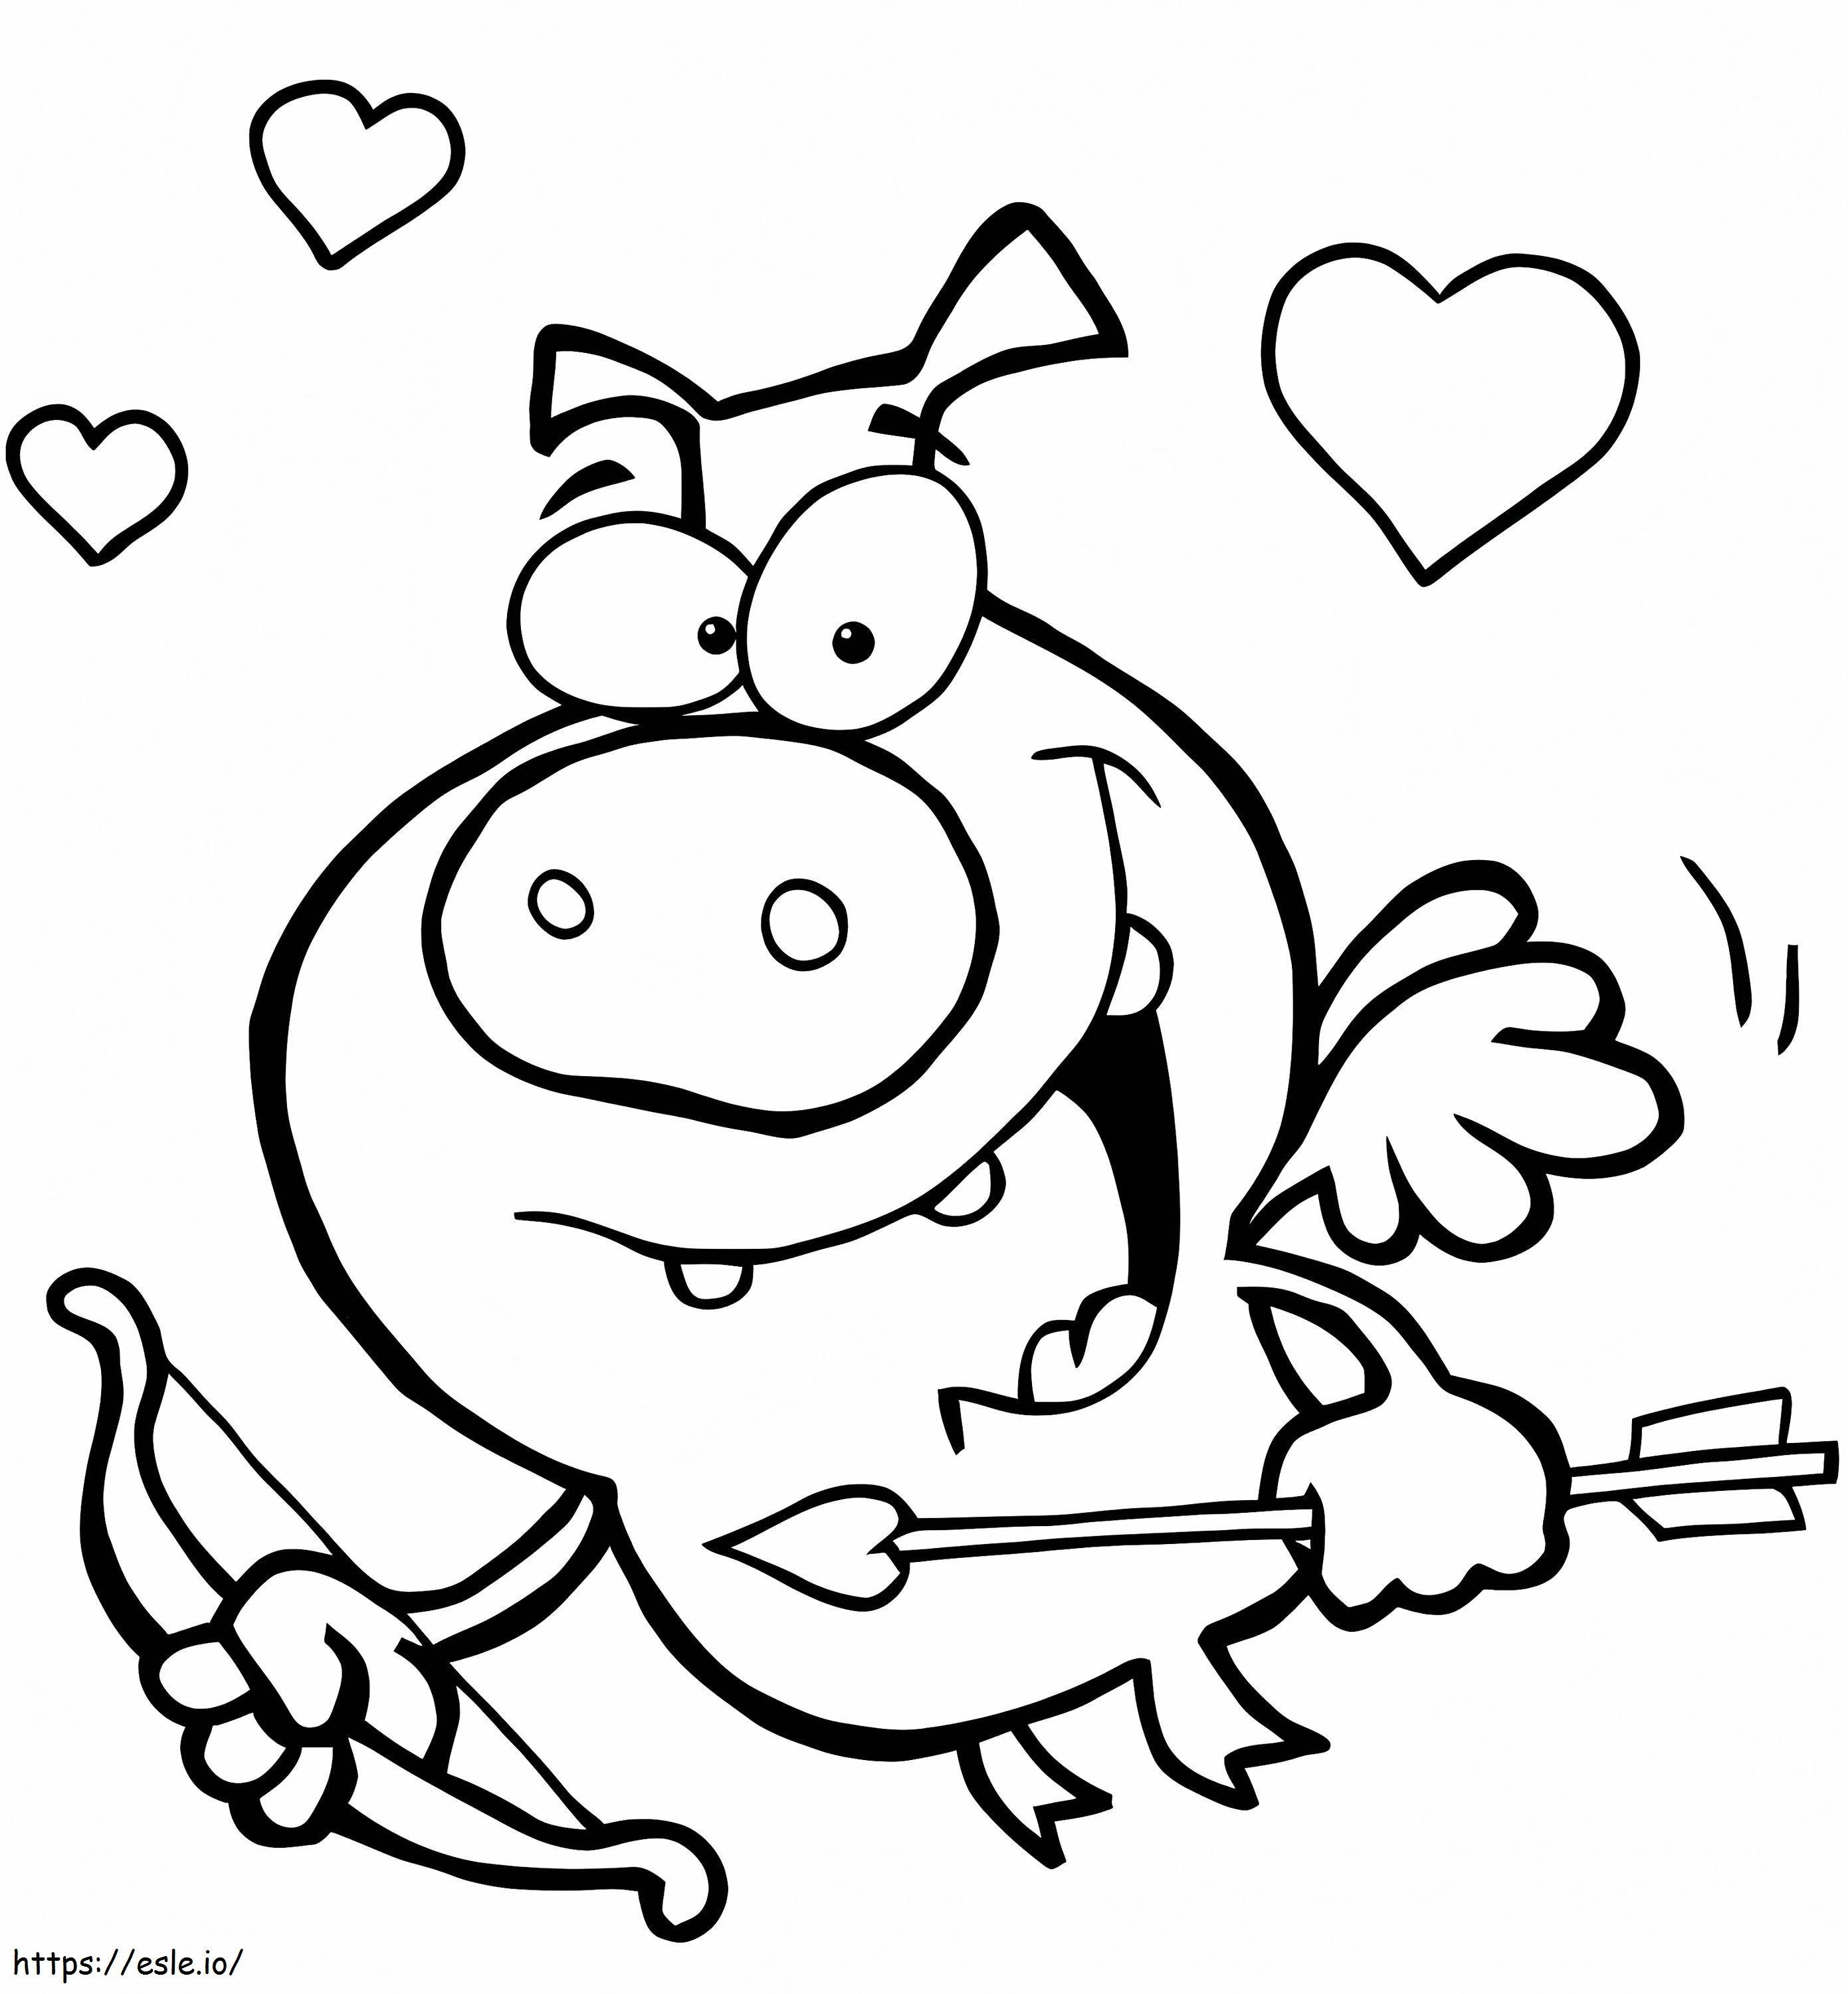 Pig Cupid coloring page